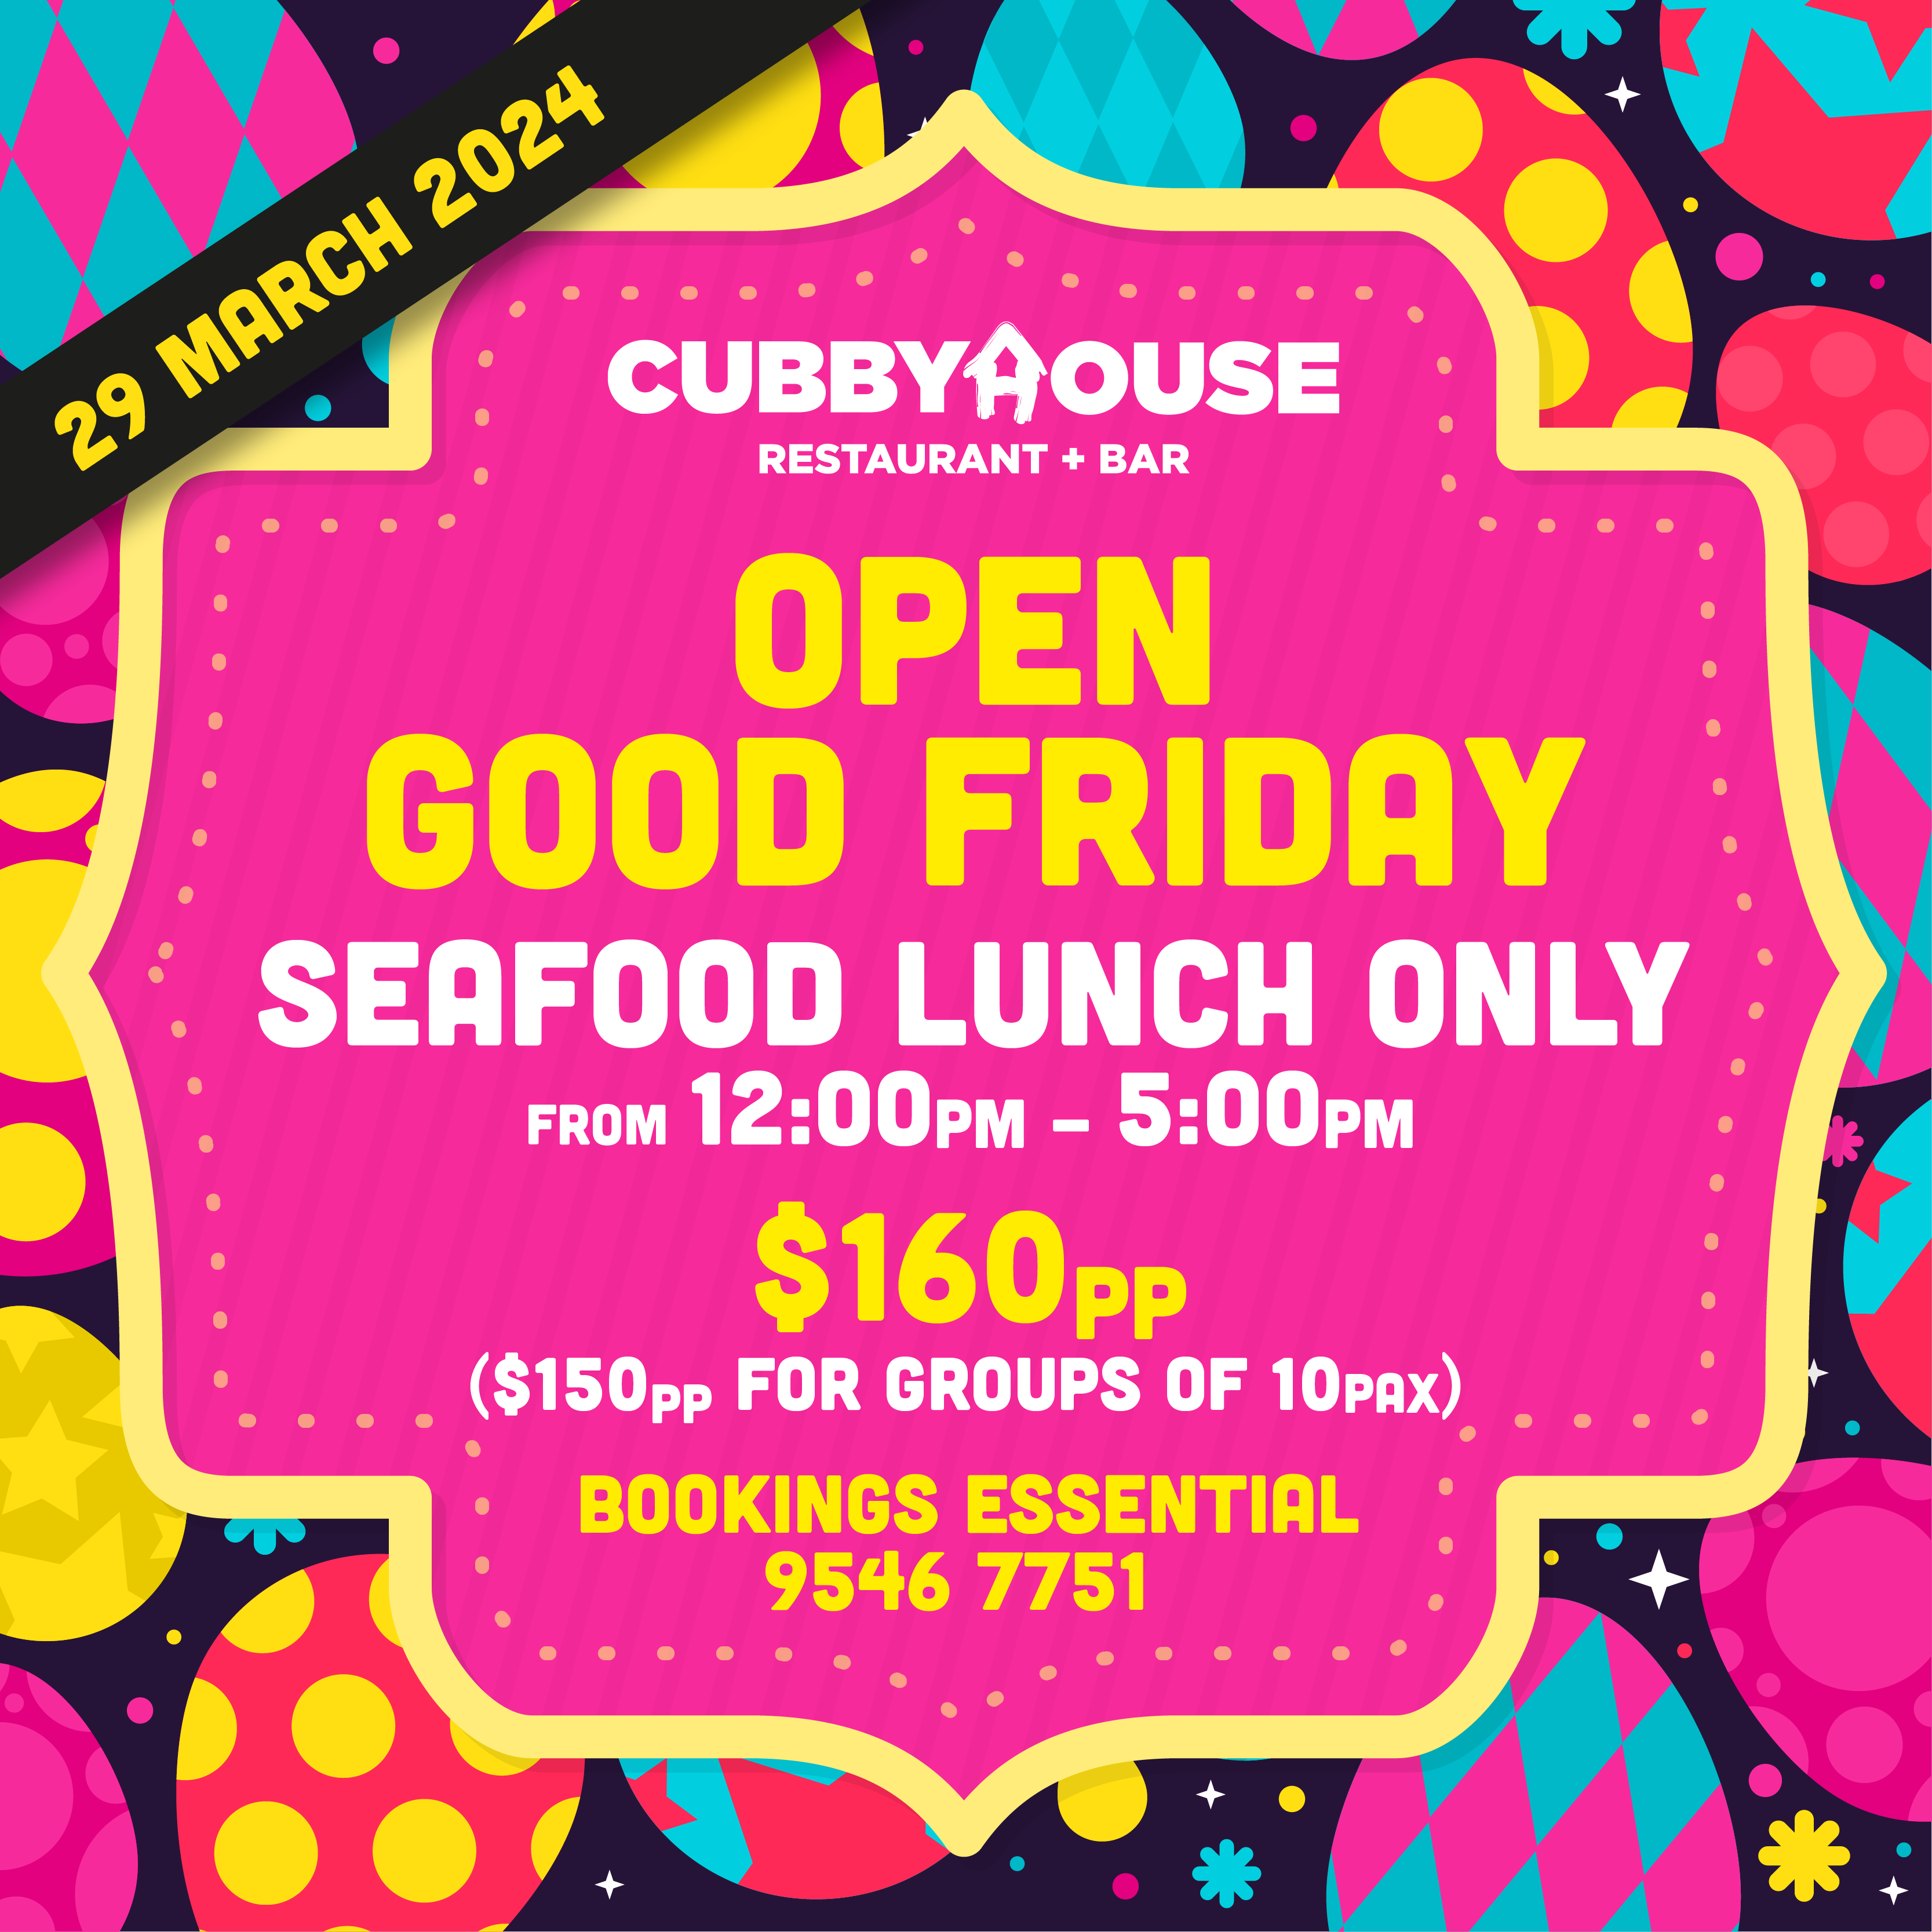 Good Friday Seafood Lunch